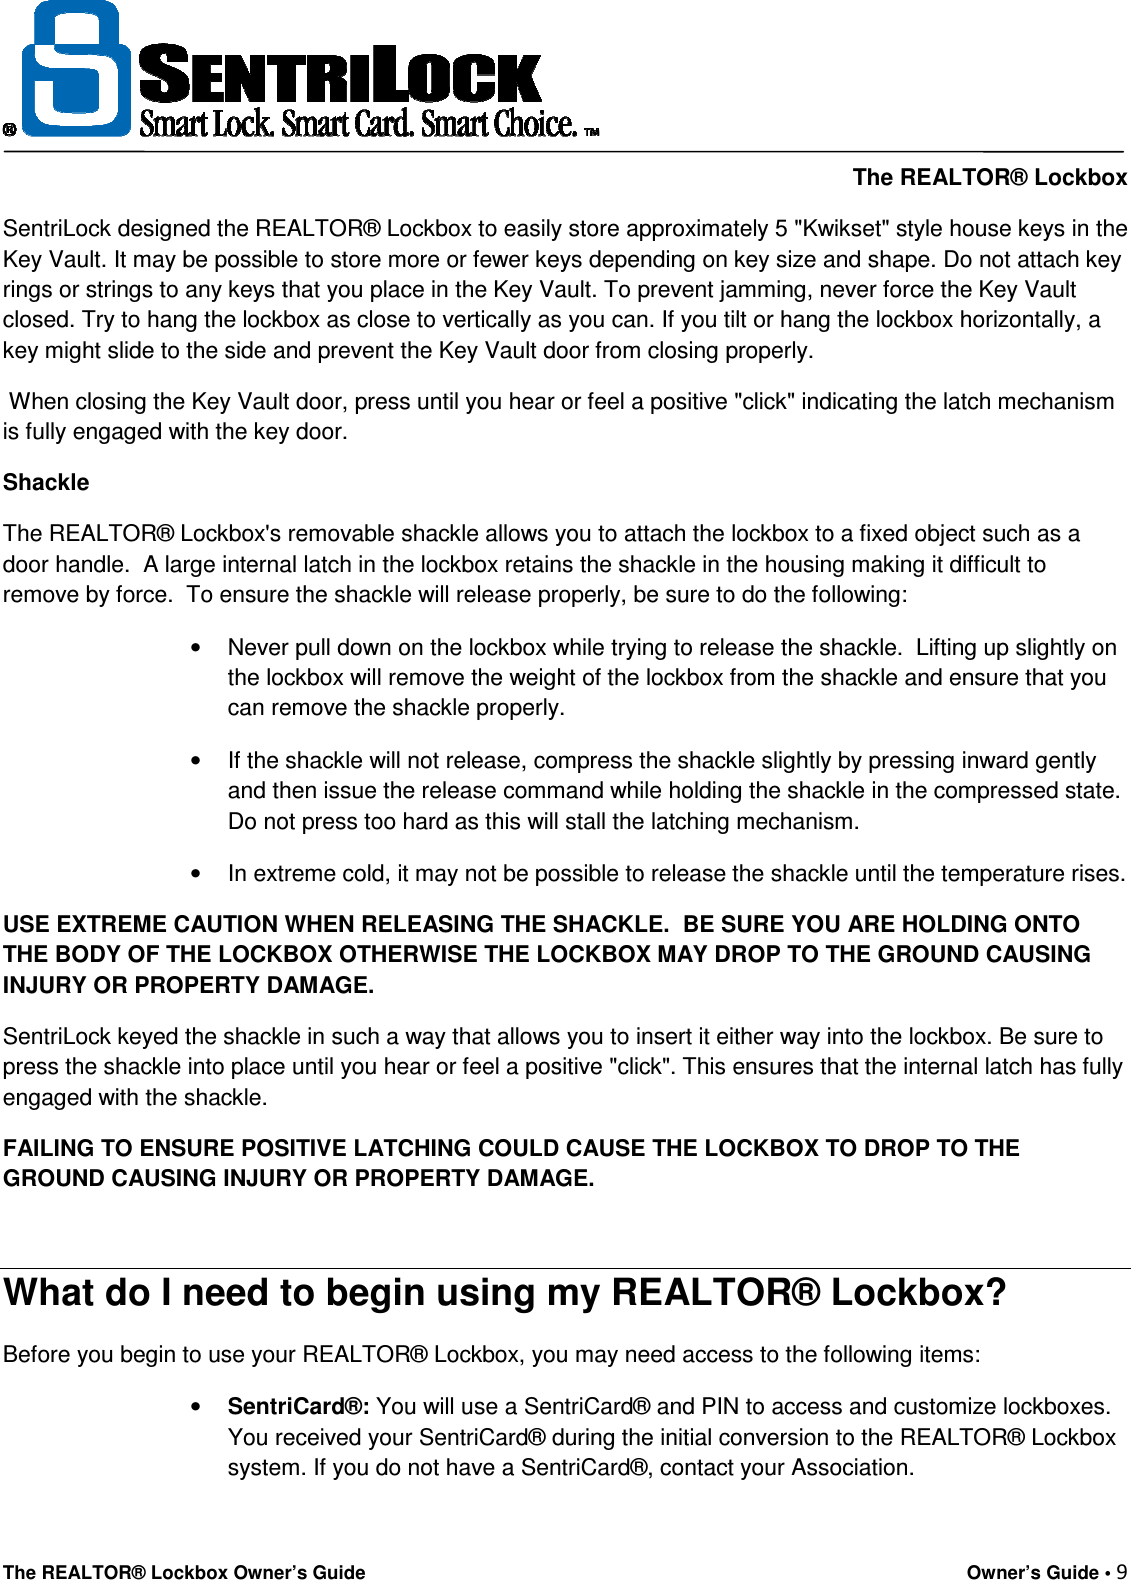     The REALTOR® Lockbox The REALTOR® Lockbox Owner’s Guide    Owner’s Guide • 9  SentriLock designed the REALTOR® Lockbox to easily store approximately 5 &quot;Kwikset&quot; style house keys in the Key Vault. It may be possible to store more or fewer keys depending on key size and shape. Do not attach key rings or strings to any keys that you place in the Key Vault. To prevent jamming, never force the Key Vault closed. Try to hang the lockbox as close to vertically as you can. If you tilt or hang the lockbox horizontally, a key might slide to the side and prevent the Key Vault door from closing properly.   When closing the Key Vault door, press until you hear or feel a positive &quot;click&quot; indicating the latch mechanism is fully engaged with the key door. Shackle The REALTOR® Lockbox&apos;s removable shackle allows you to attach the lockbox to a fixed object such as a door handle.  A large internal latch in the lockbox retains the shackle in the housing making it difficult to remove by force.  To ensure the shackle will release properly, be sure to do the following: •  Never pull down on the lockbox while trying to release the shackle.  Lifting up slightly on the lockbox will remove the weight of the lockbox from the shackle and ensure that you can remove the shackle properly. •  If the shackle will not release, compress the shackle slightly by pressing inward gently and then issue the release command while holding the shackle in the compressed state. Do not press too hard as this will stall the latching mechanism. •  In extreme cold, it may not be possible to release the shackle until the temperature rises. USE EXTREME CAUTION WHEN RELEASING THE SHACKLE.  BE SURE YOU ARE HOLDING ONTO THE BODY OF THE LOCKBOX OTHERWISE THE LOCKBOX MAY DROP TO THE GROUND CAUSING INJURY OR PROPERTY DAMAGE. SentriLock keyed the shackle in such a way that allows you to insert it either way into the lockbox. Be sure to press the shackle into place until you hear or feel a positive &quot;click&quot;. This ensures that the internal latch has fully engaged with the shackle. FAILING TO ENSURE POSITIVE LATCHING COULD CAUSE THE LOCKBOX TO DROP TO THE GROUND CAUSING INJURY OR PROPERTY DAMAGE.  What do I need to begin using my REALTOR® Lockbox? Before you begin to use your REALTOR® Lockbox, you may need access to the following items: • SentriCard®: You will use a SentriCard® and PIN to access and customize lockboxes. You received your SentriCard® during the initial conversion to the REALTOR® Lockbox system. If you do not have a SentriCard®, contact your Association. 